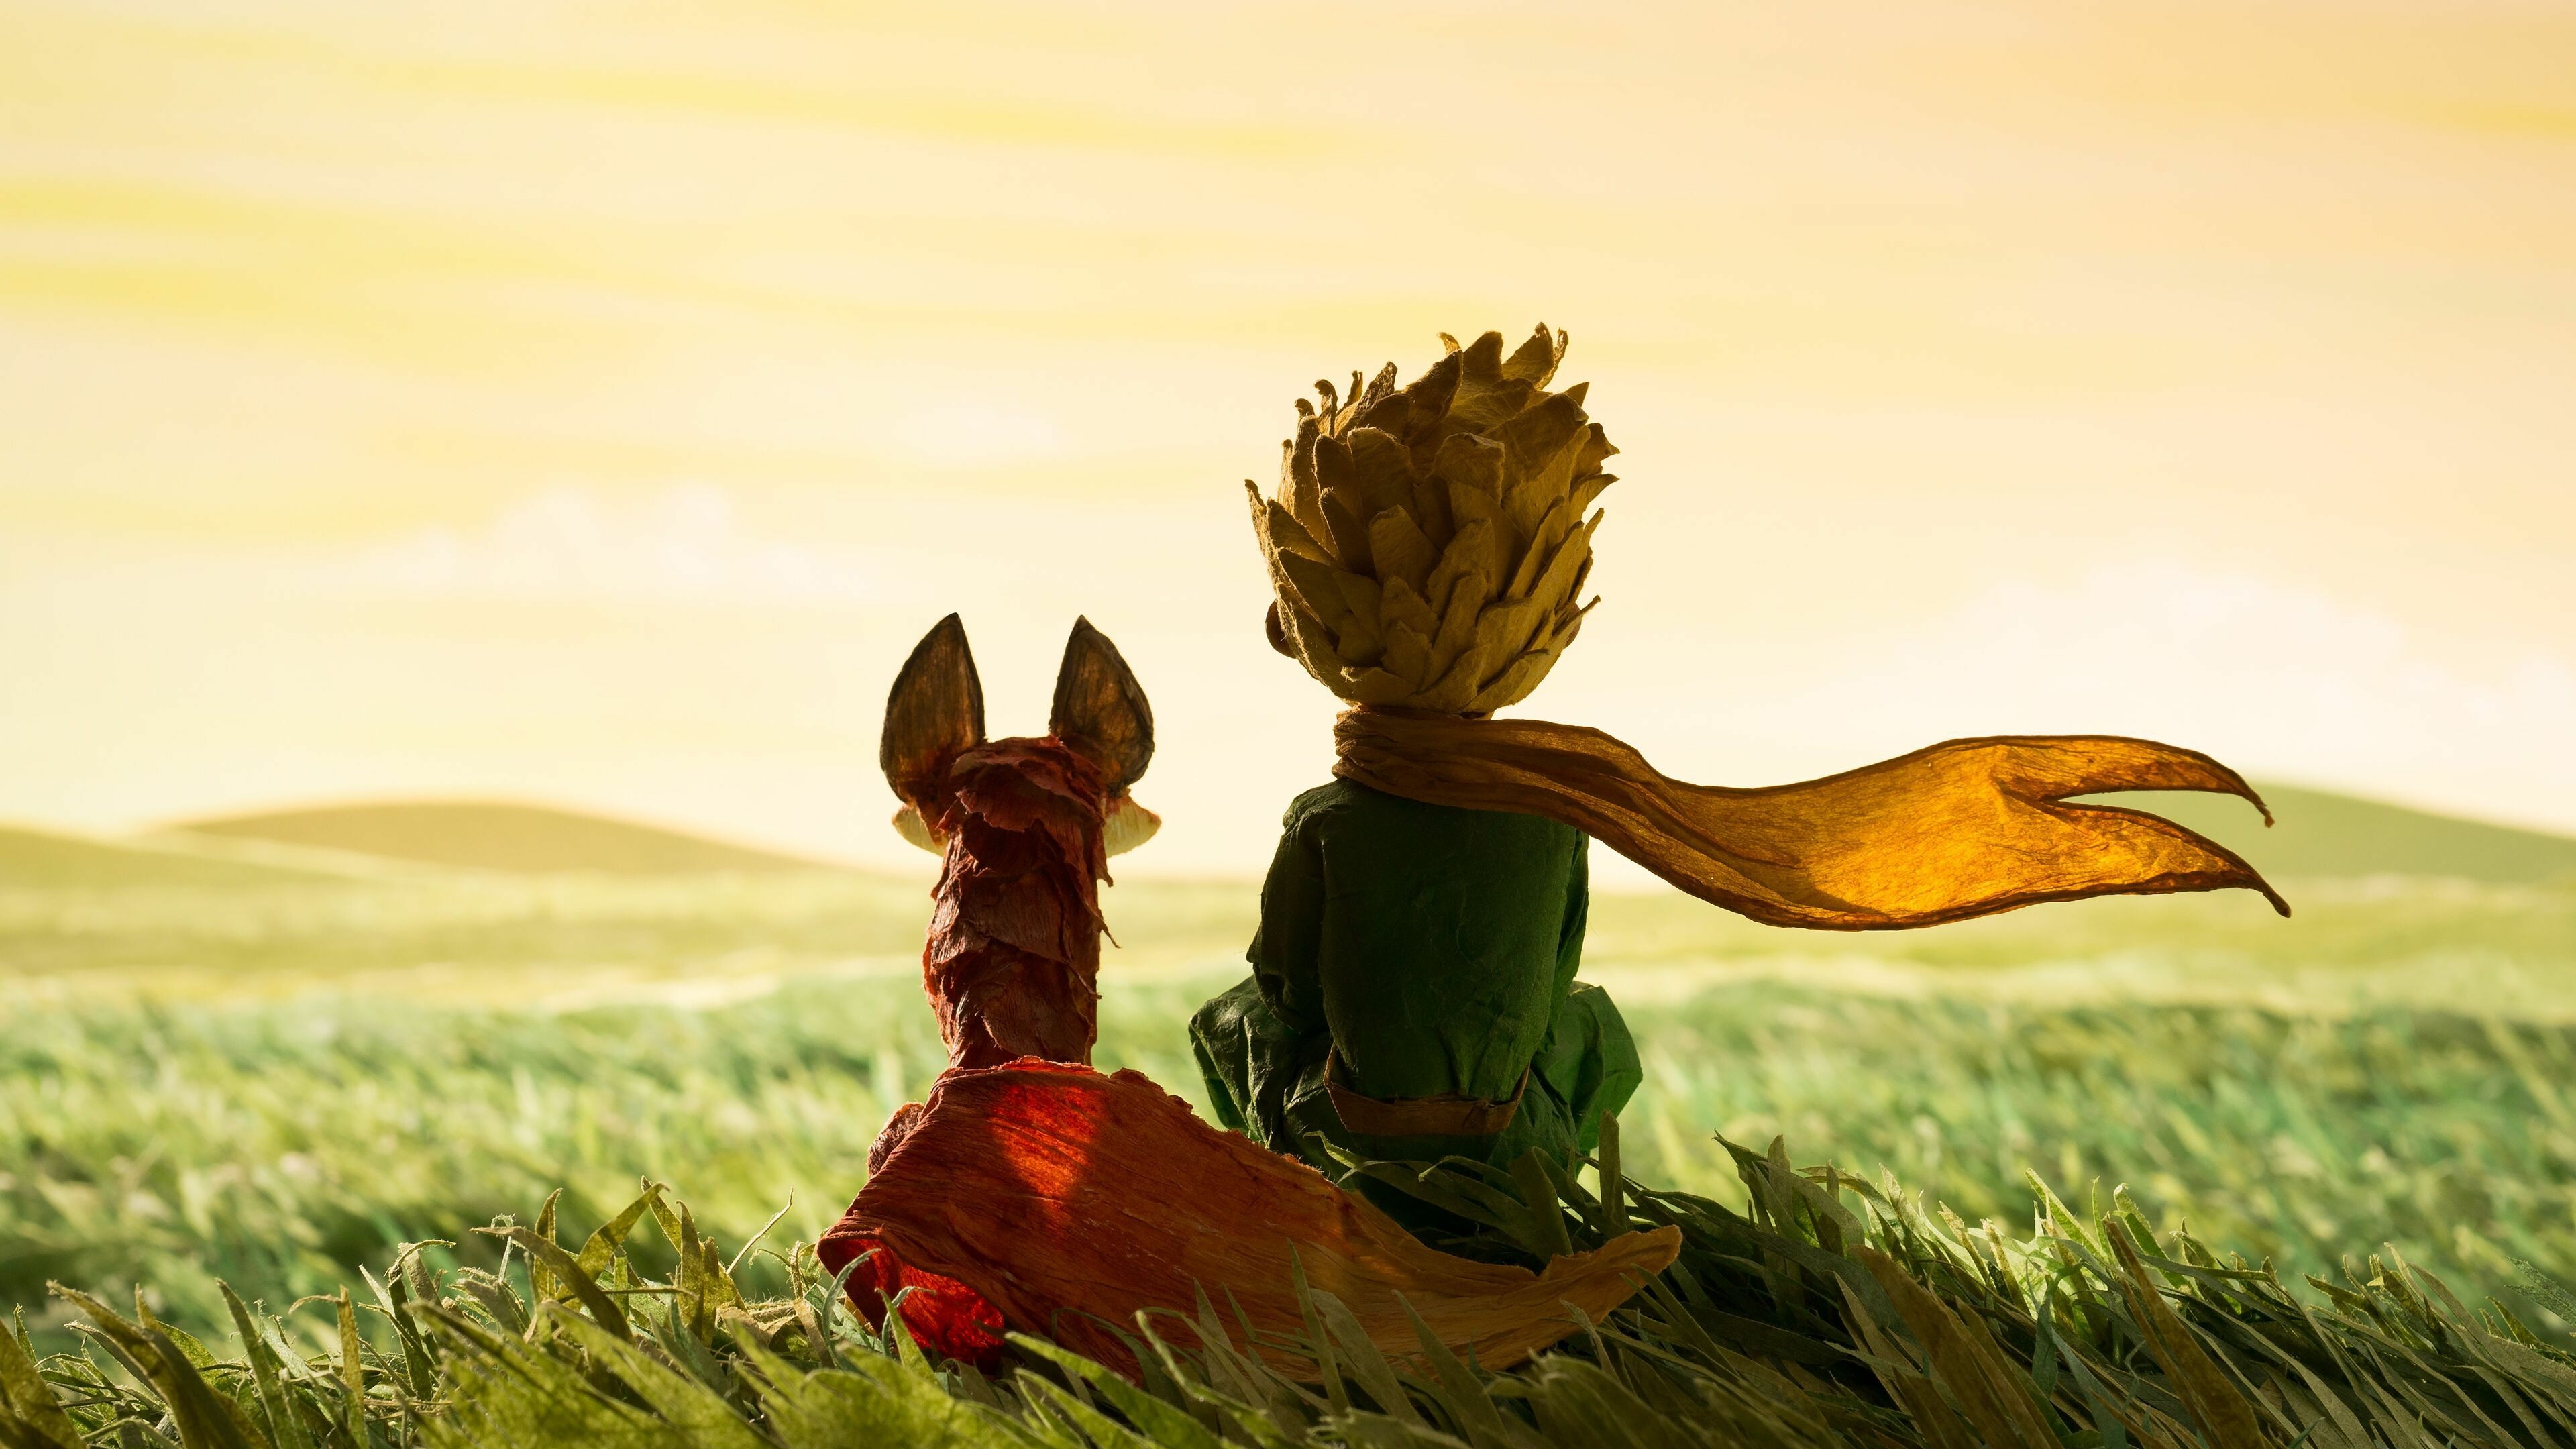 The Little Prince: A 2015 French animated fantasy adventure drama film directed by Mark Osborne and based on the 1943 novella of the same name by Antoine de Saint-Exupery. 3840x2160 4K Wallpaper.